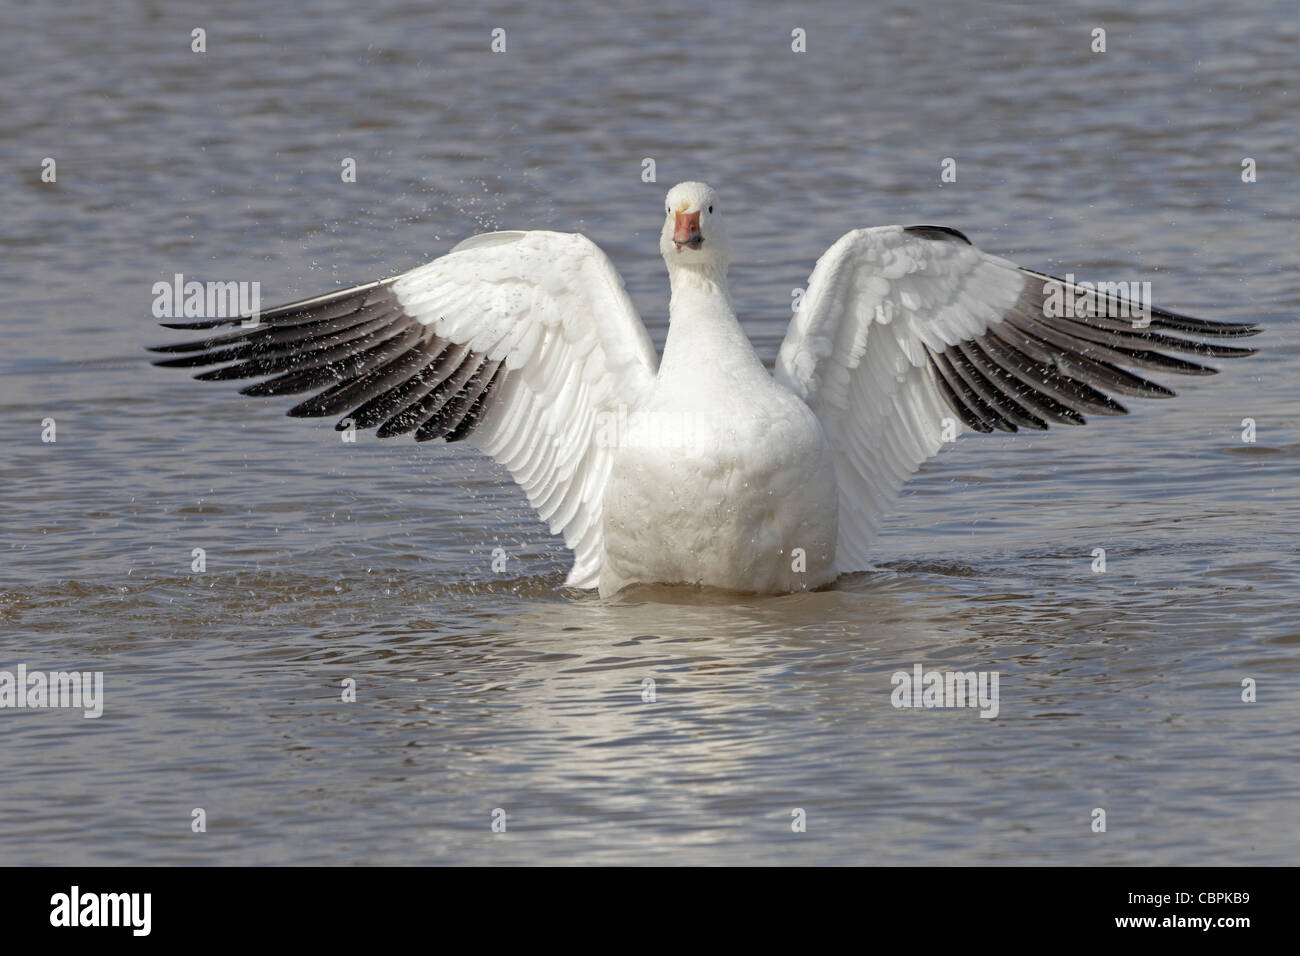 Snow goose flapping its wings on a pond Stock Photo